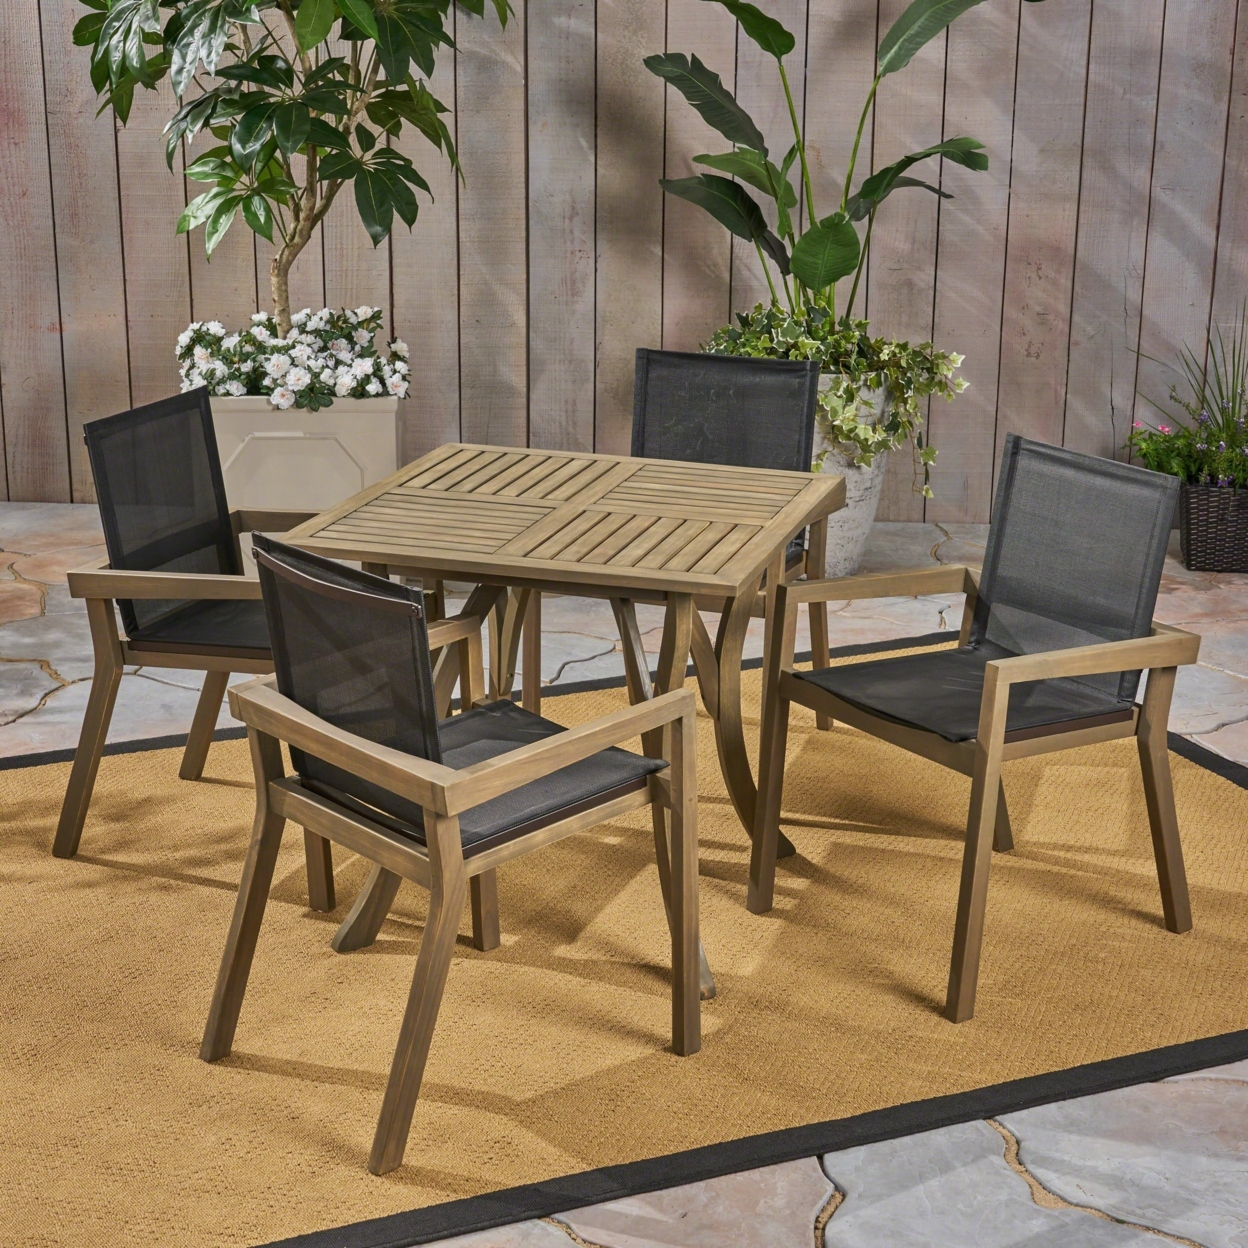 Ruiz Outdoor Acacia Wood 4 Seater Square Dining Set With Mesh Seats - Gray